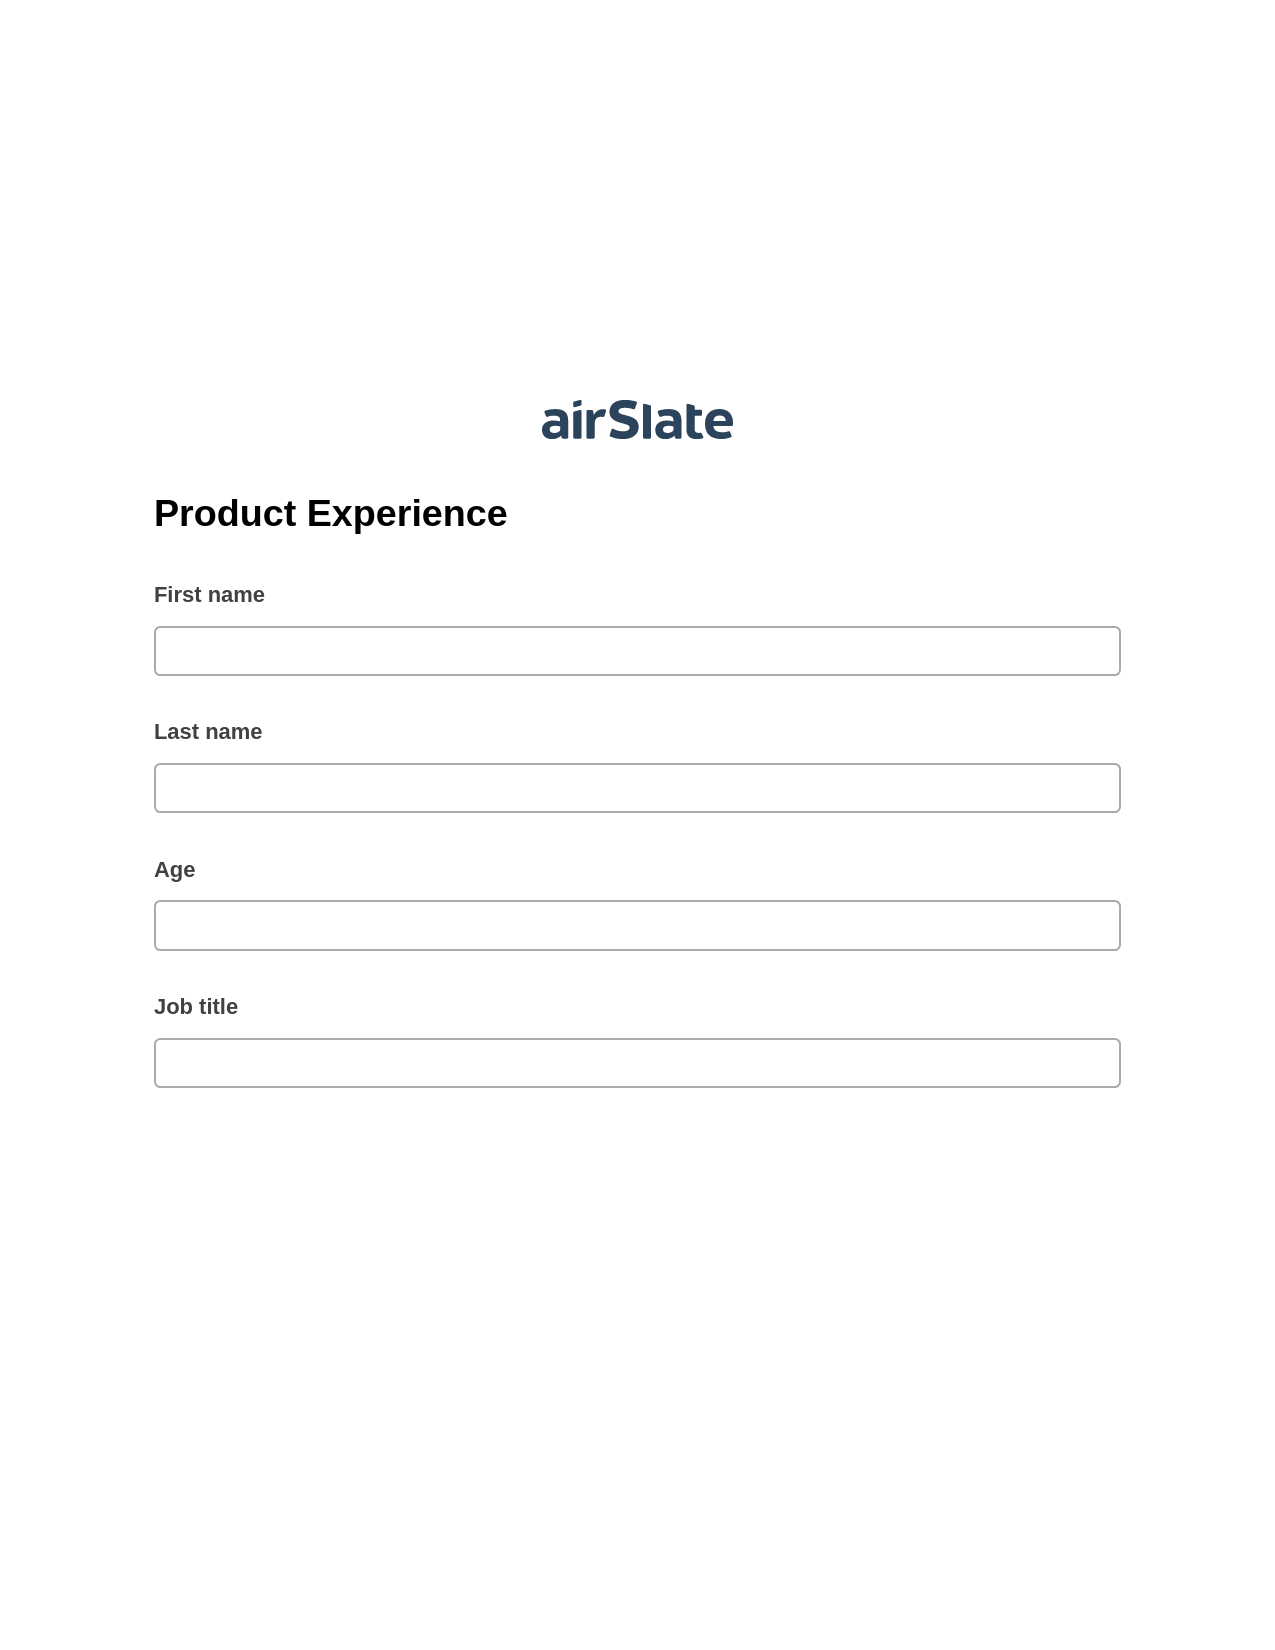 Product Experience Pre-fill from CSV File Bot, Google Cloud Print Bot, Export to Google Sheet Bot